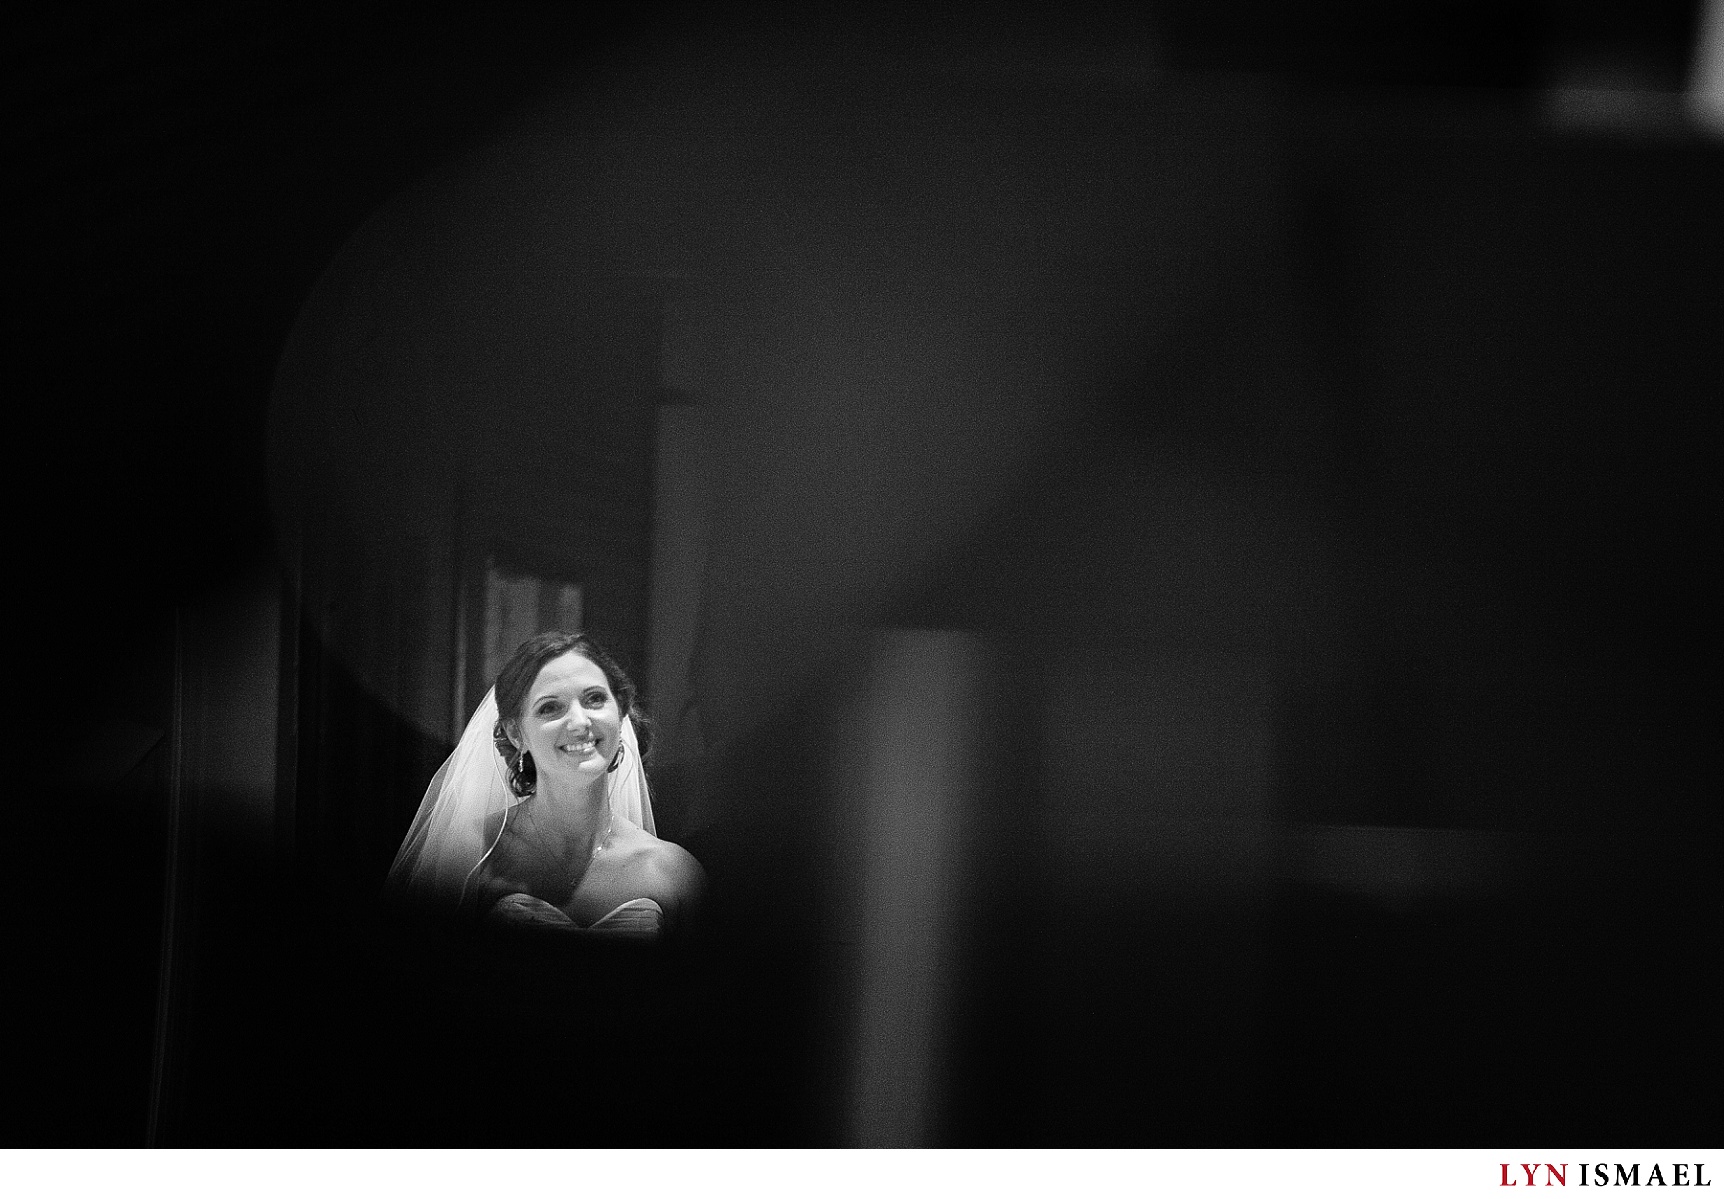 A candid portrait of the bride during her wedding ceremony.